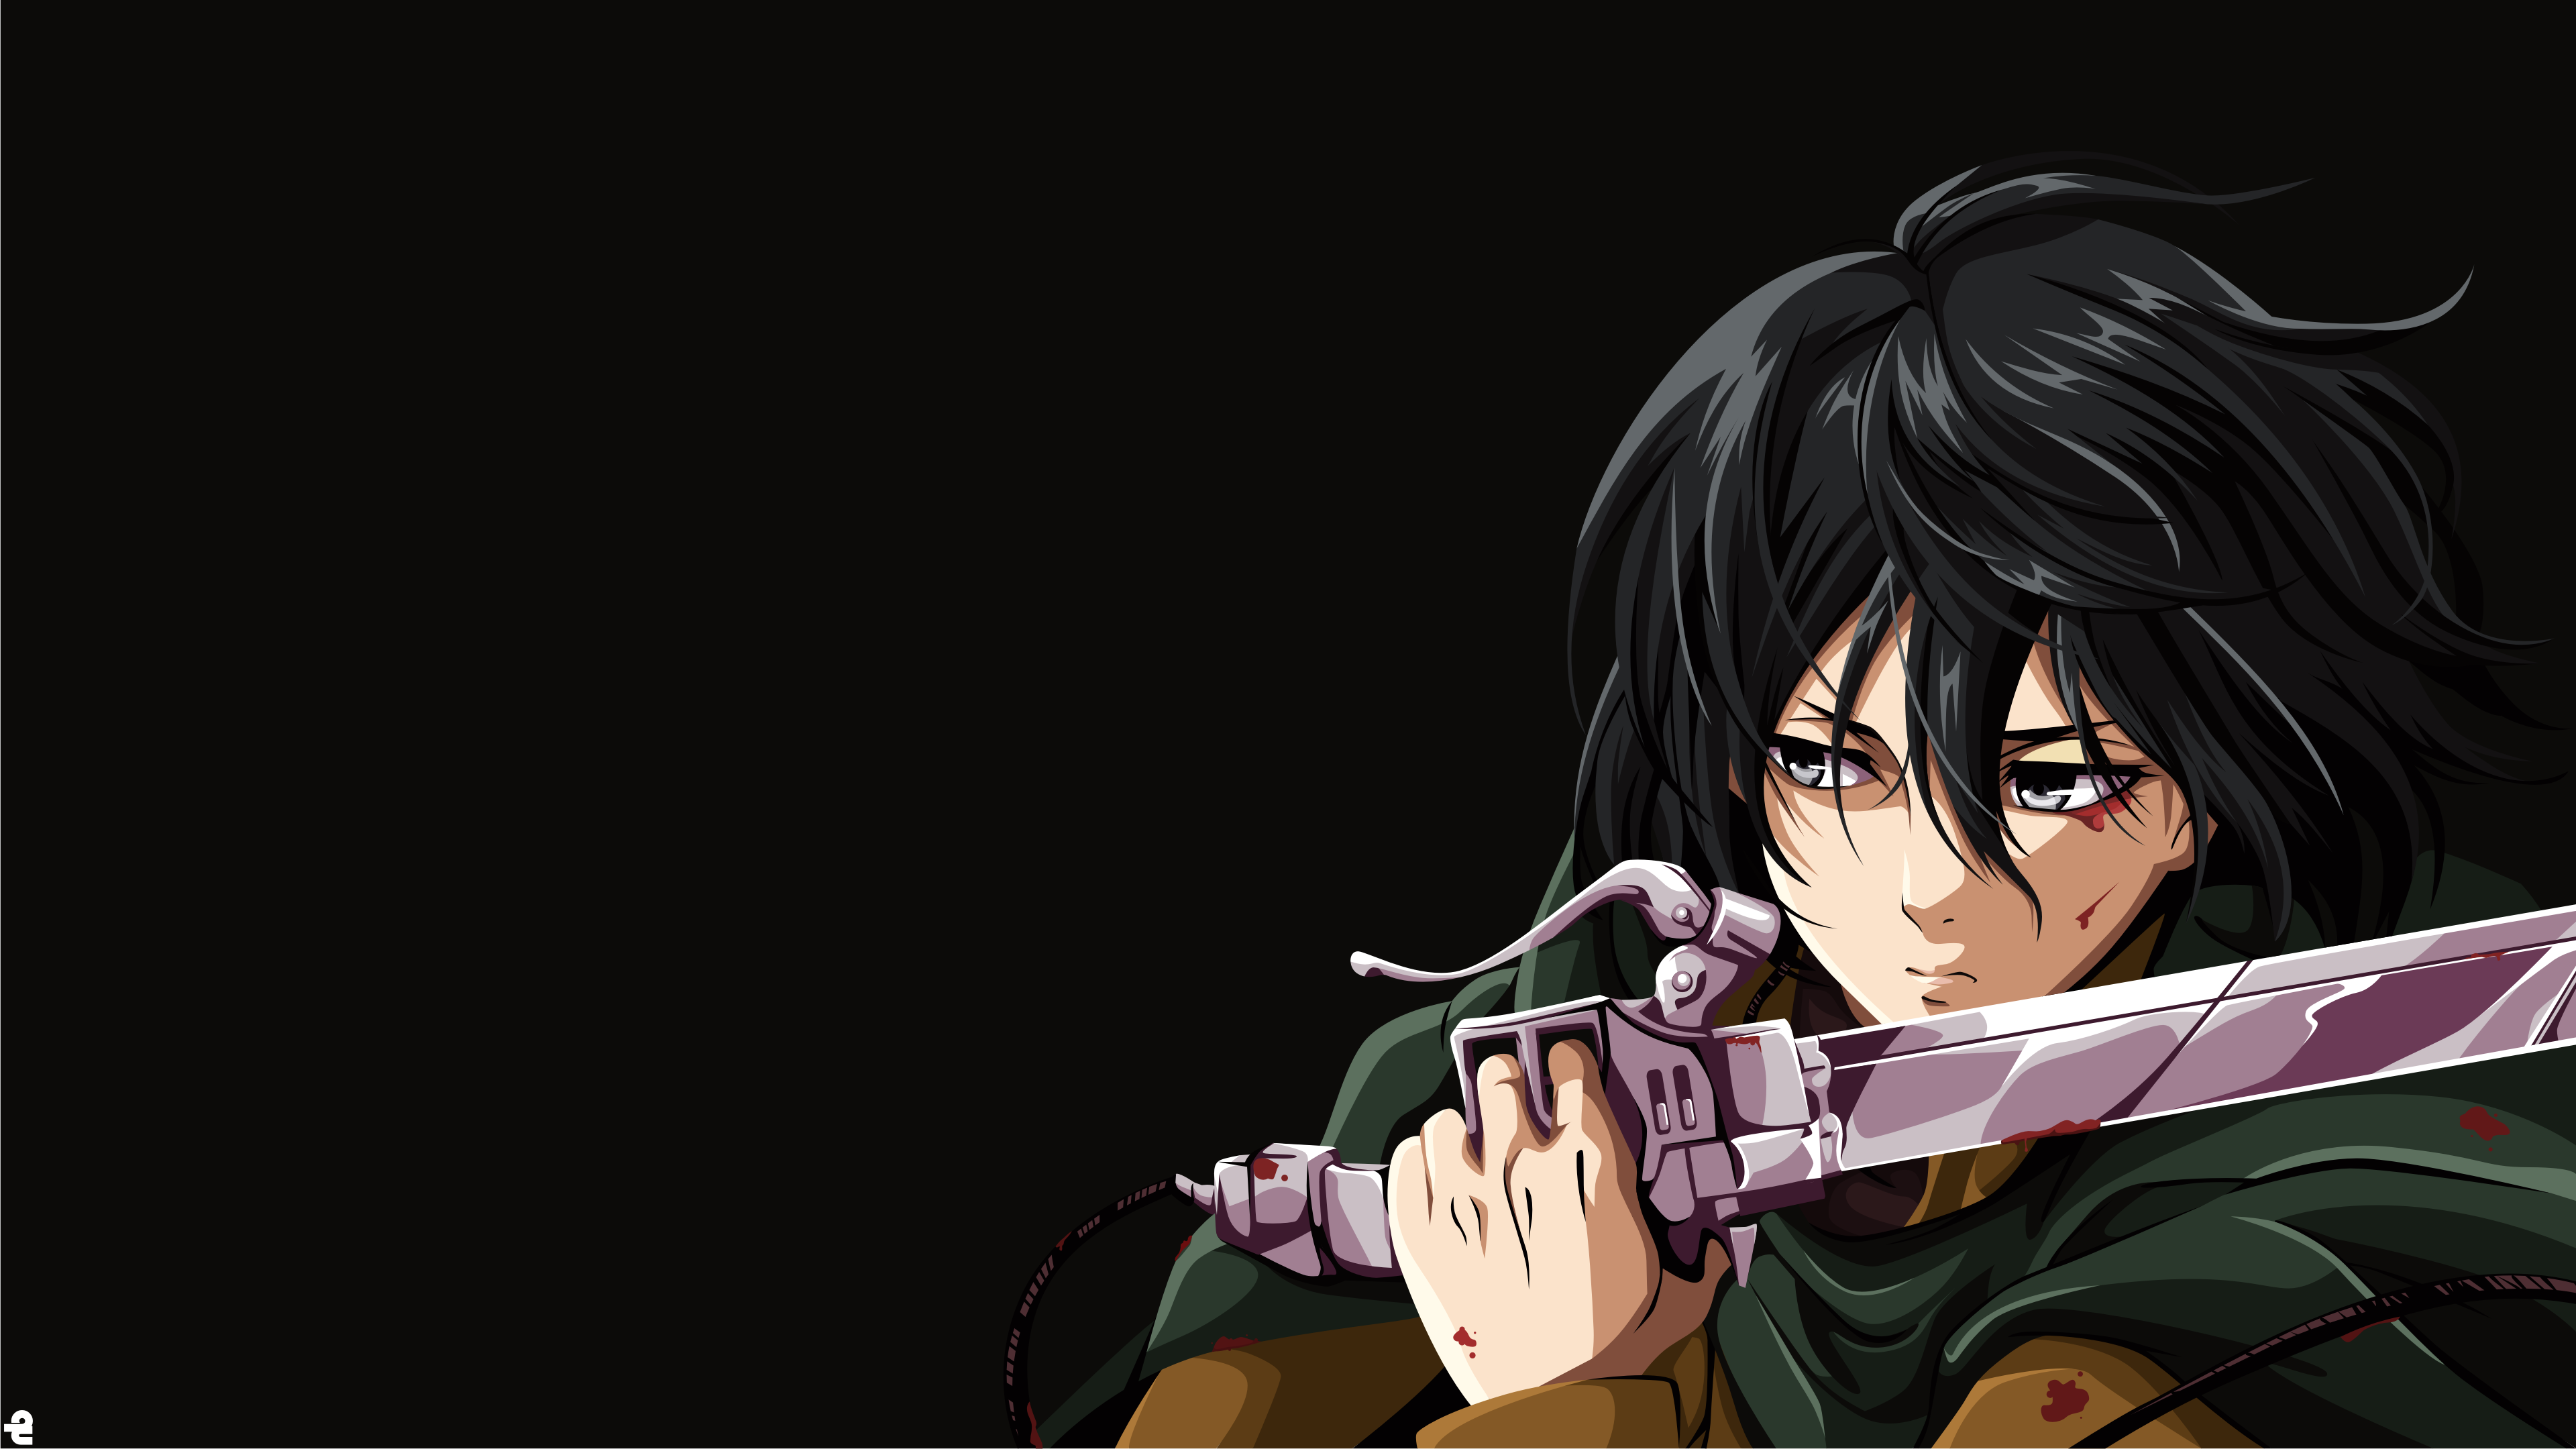 3. "Mikasa Ackerman" from the anime "Attack on Titan" - wide 10